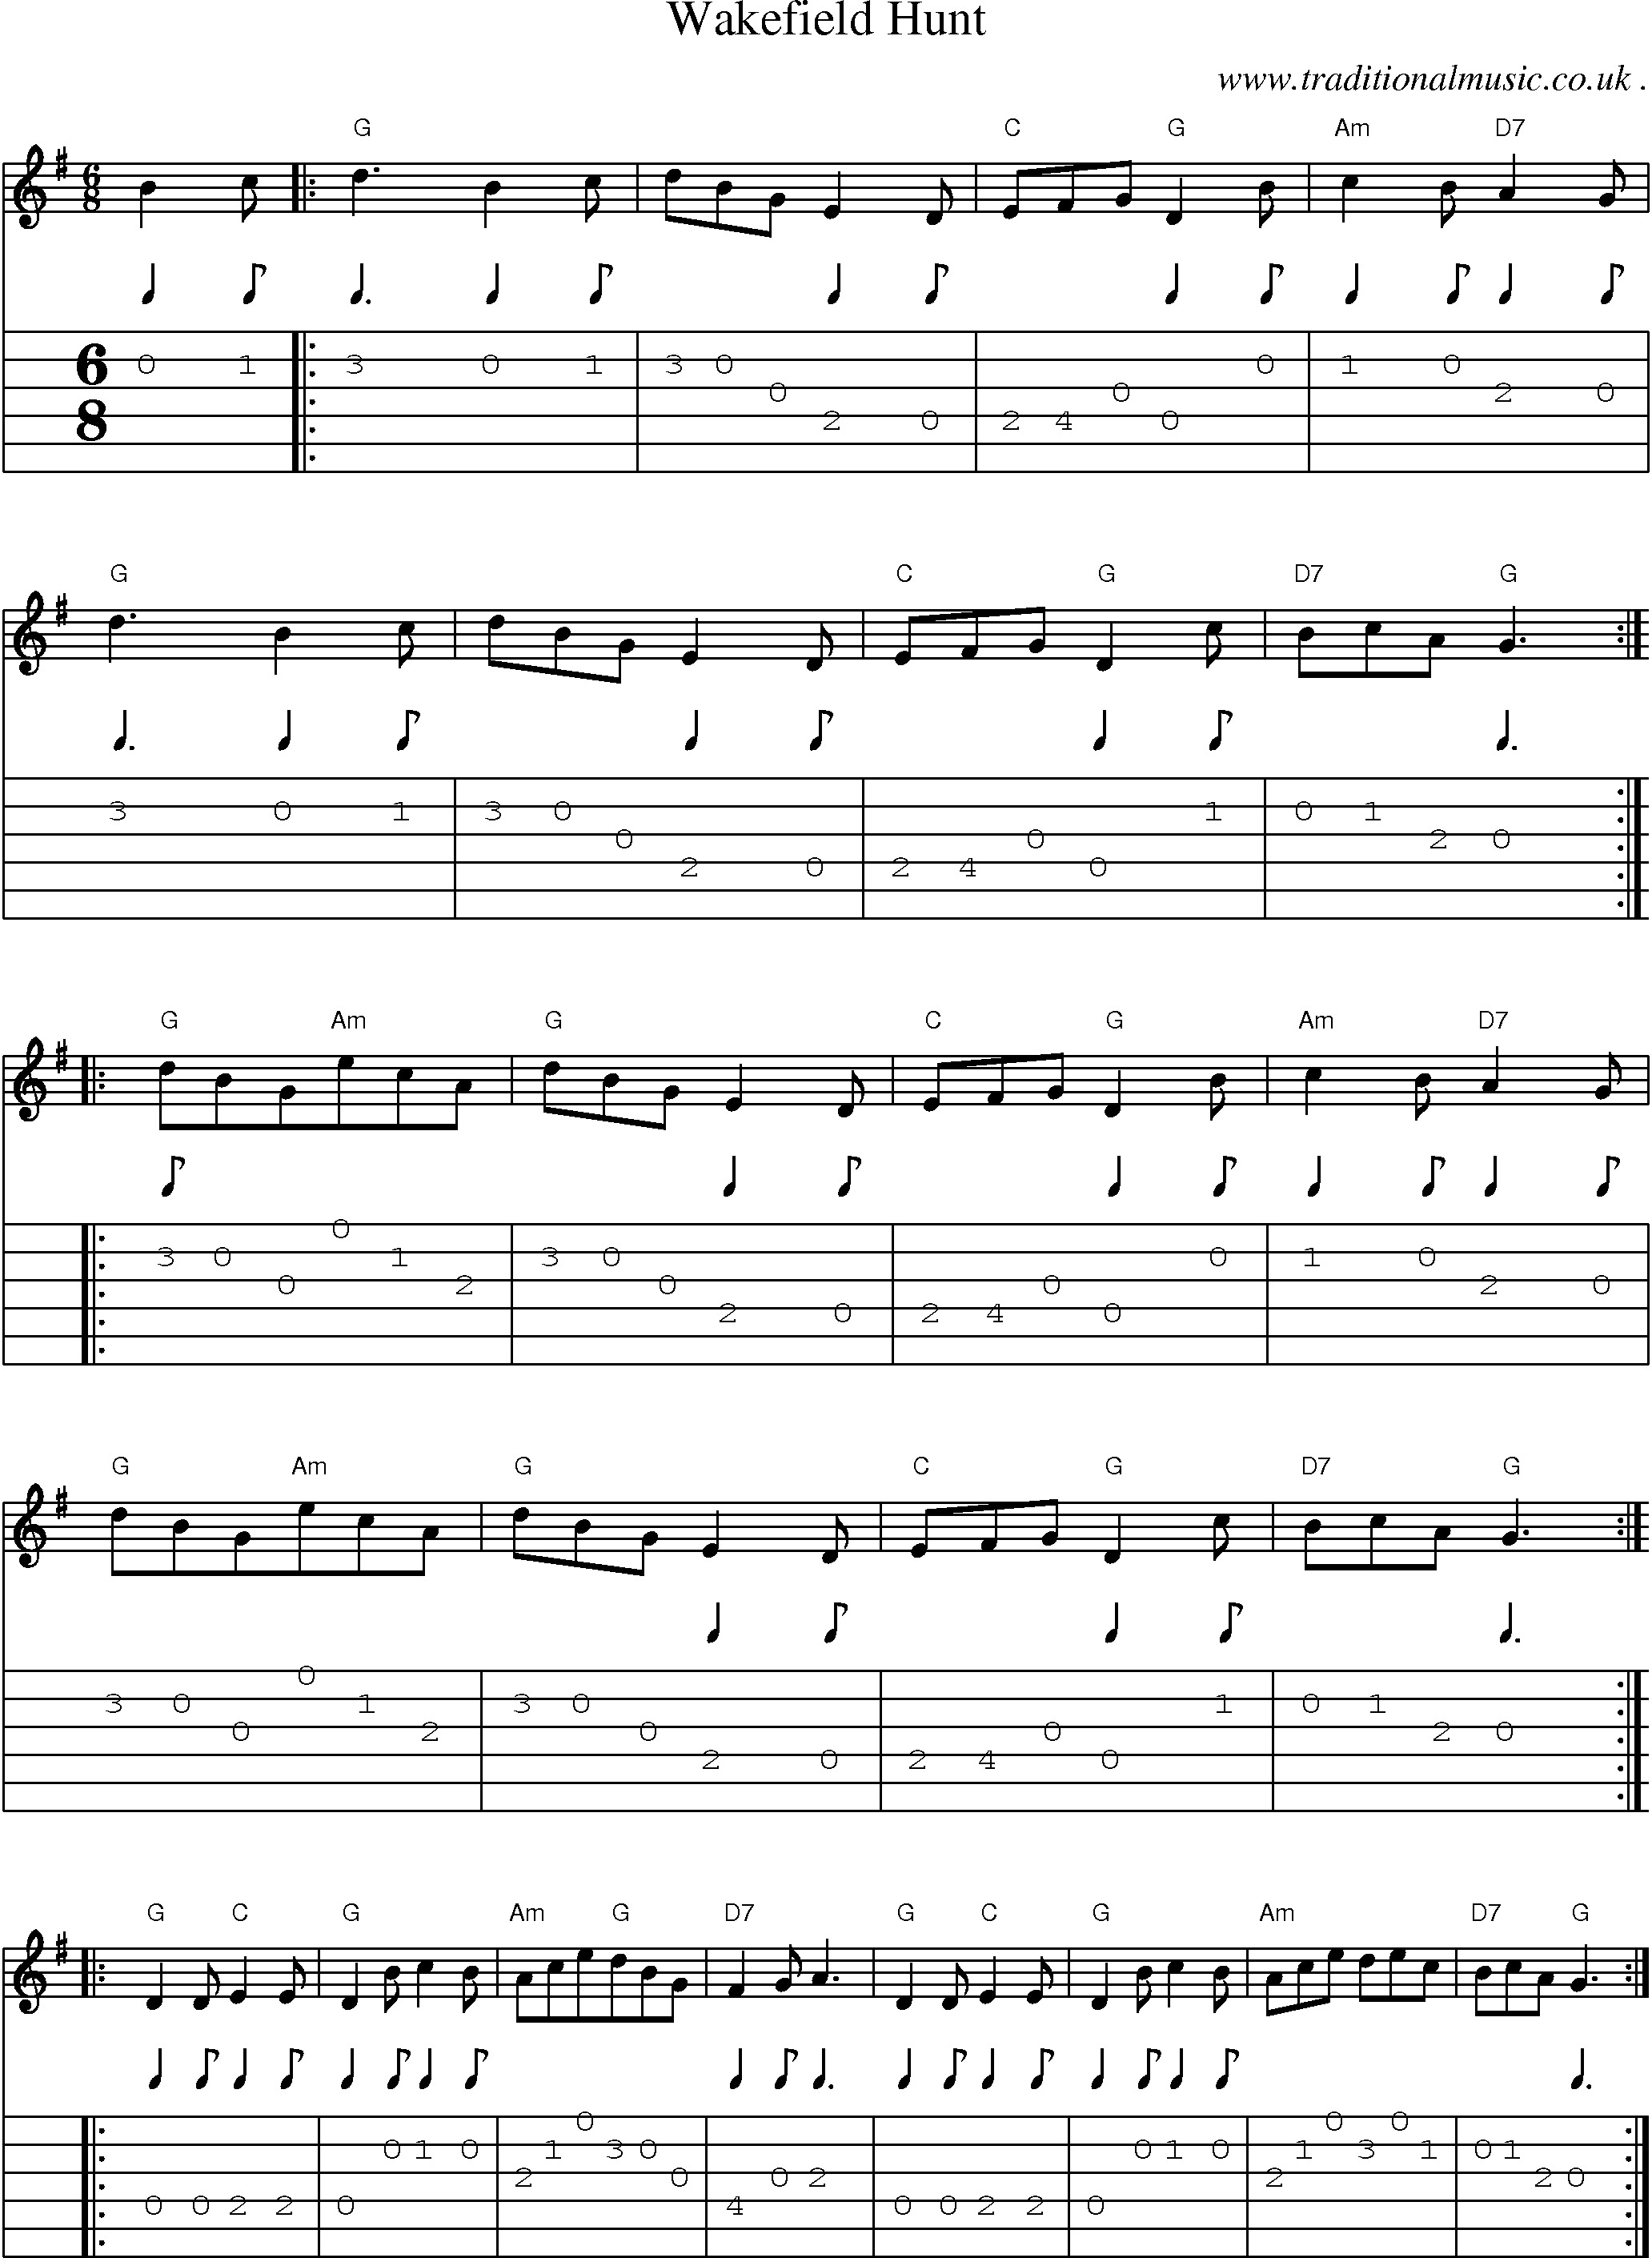 Sheet-Music and Guitar Tabs for Wakefield Hunt